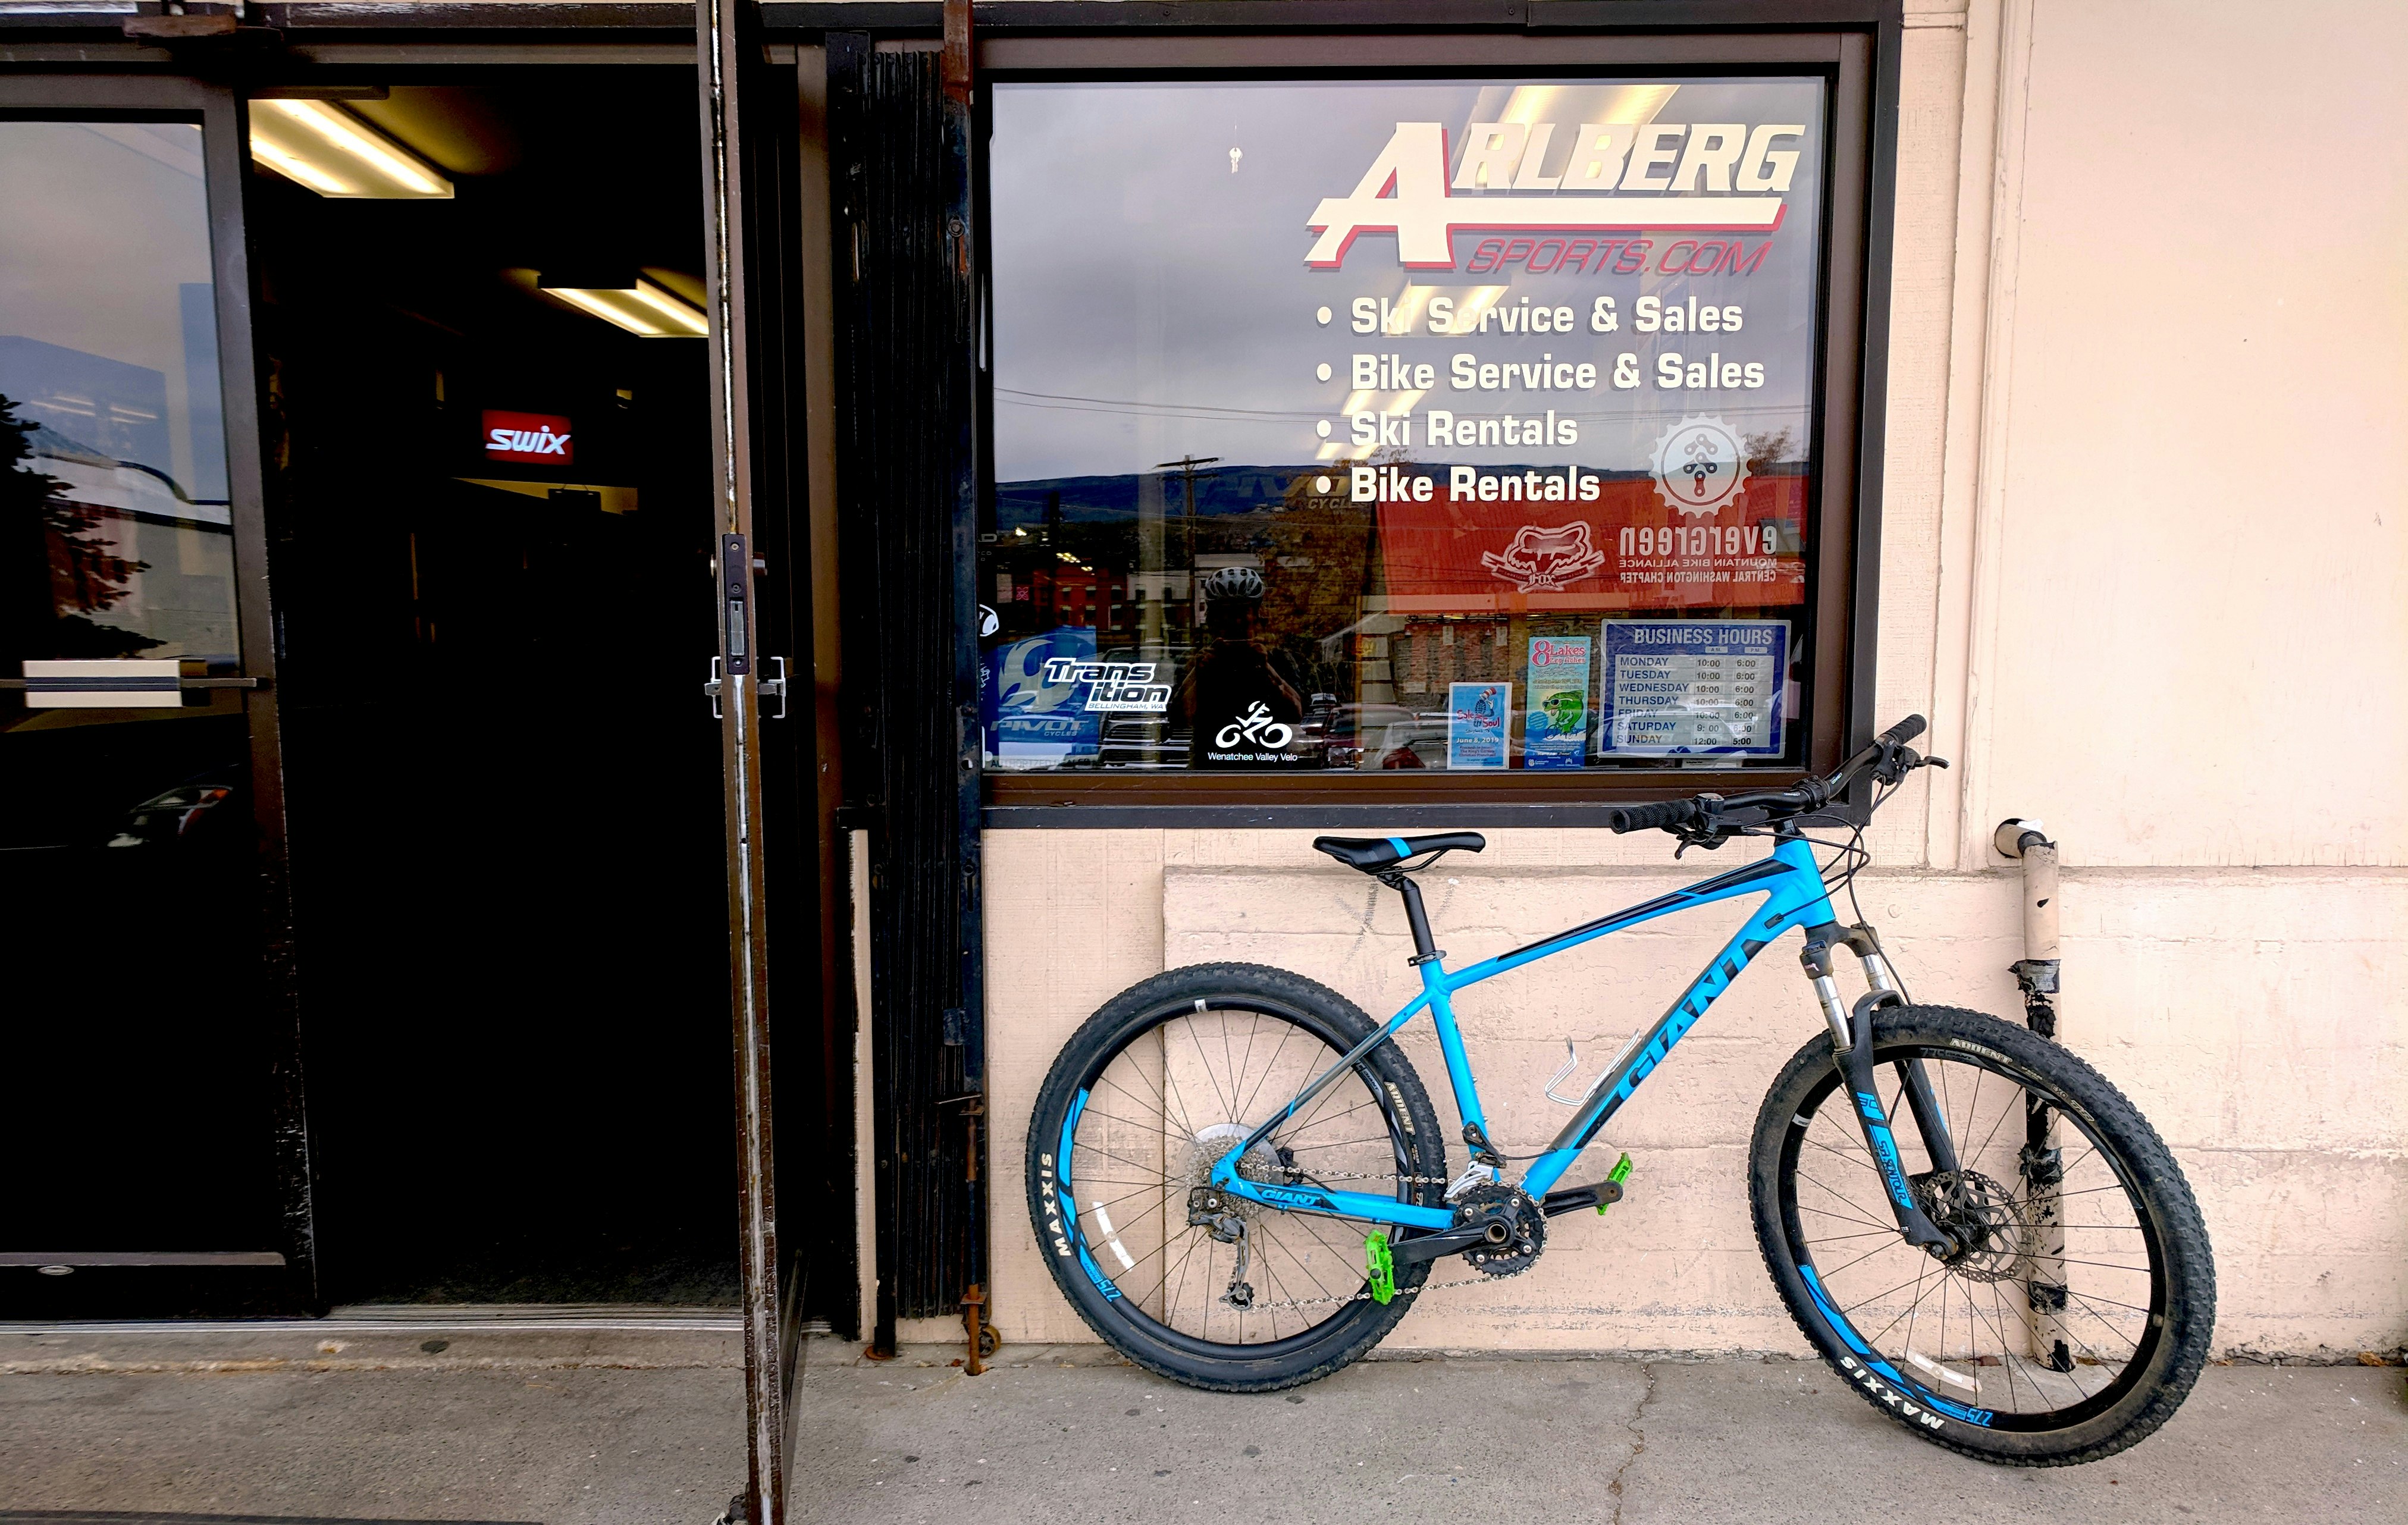 A blue mountain bike sits outside the entrance to Arlberg Sports in Wenatchee, Washington, the name of which is painted in cream letters on a window over the bike along with information about ski and bike rentals